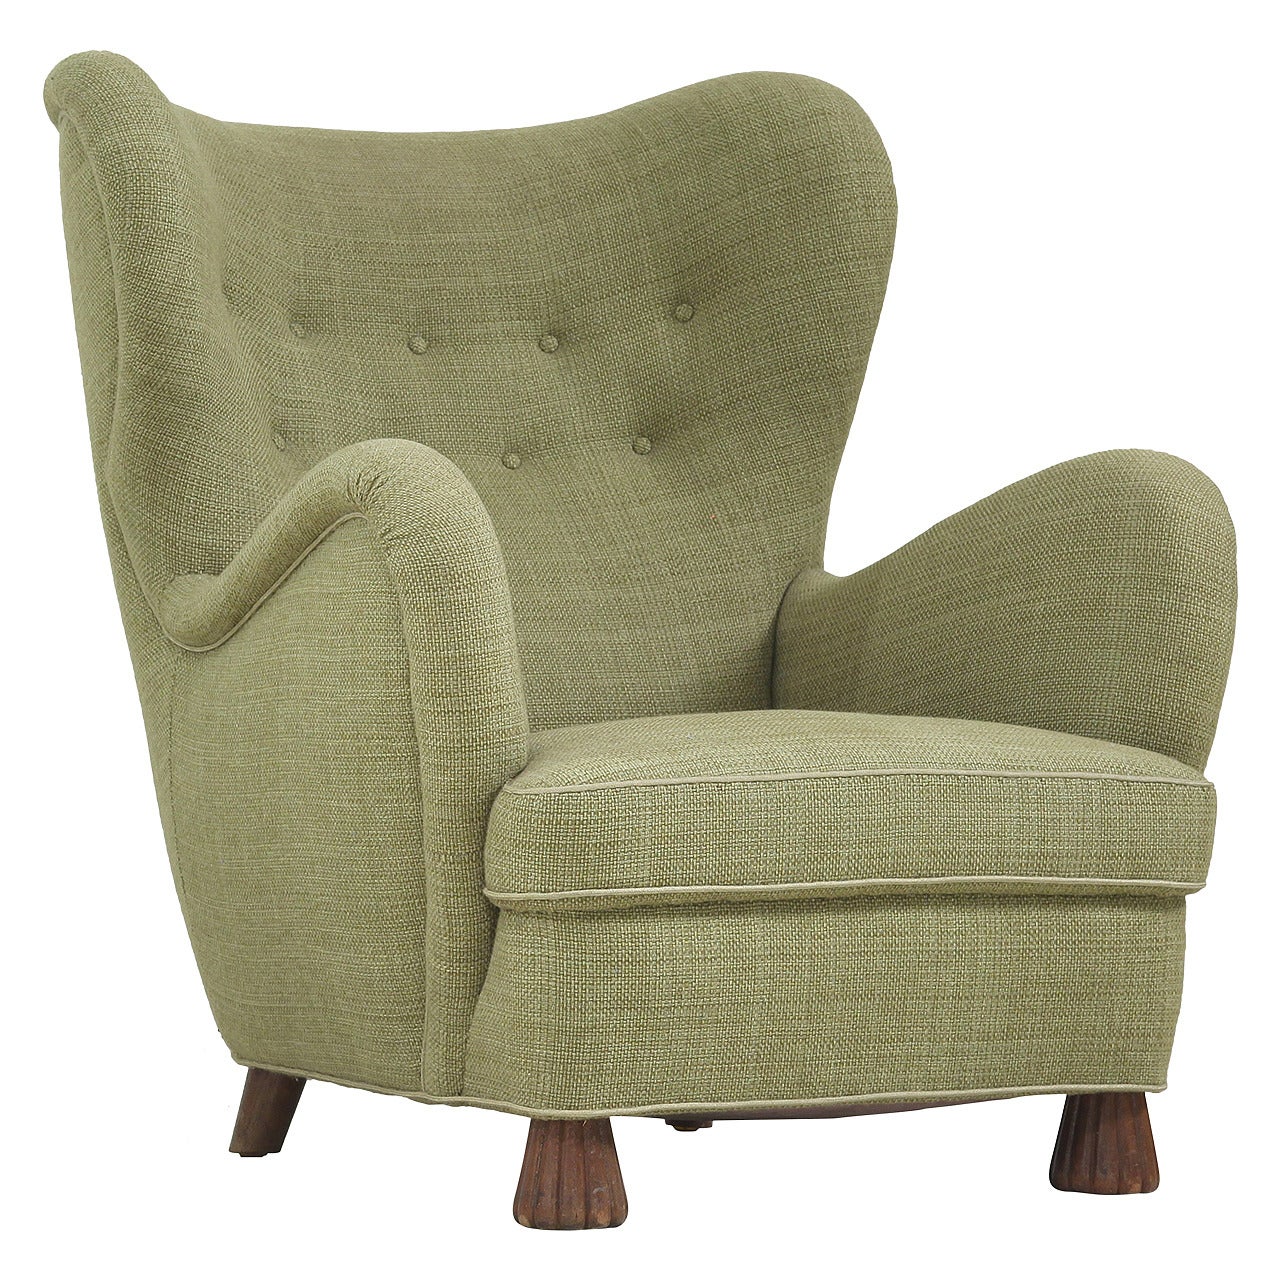 Otto Schulz High Back Armchair for Boet, Sweden, 1930s For Sale